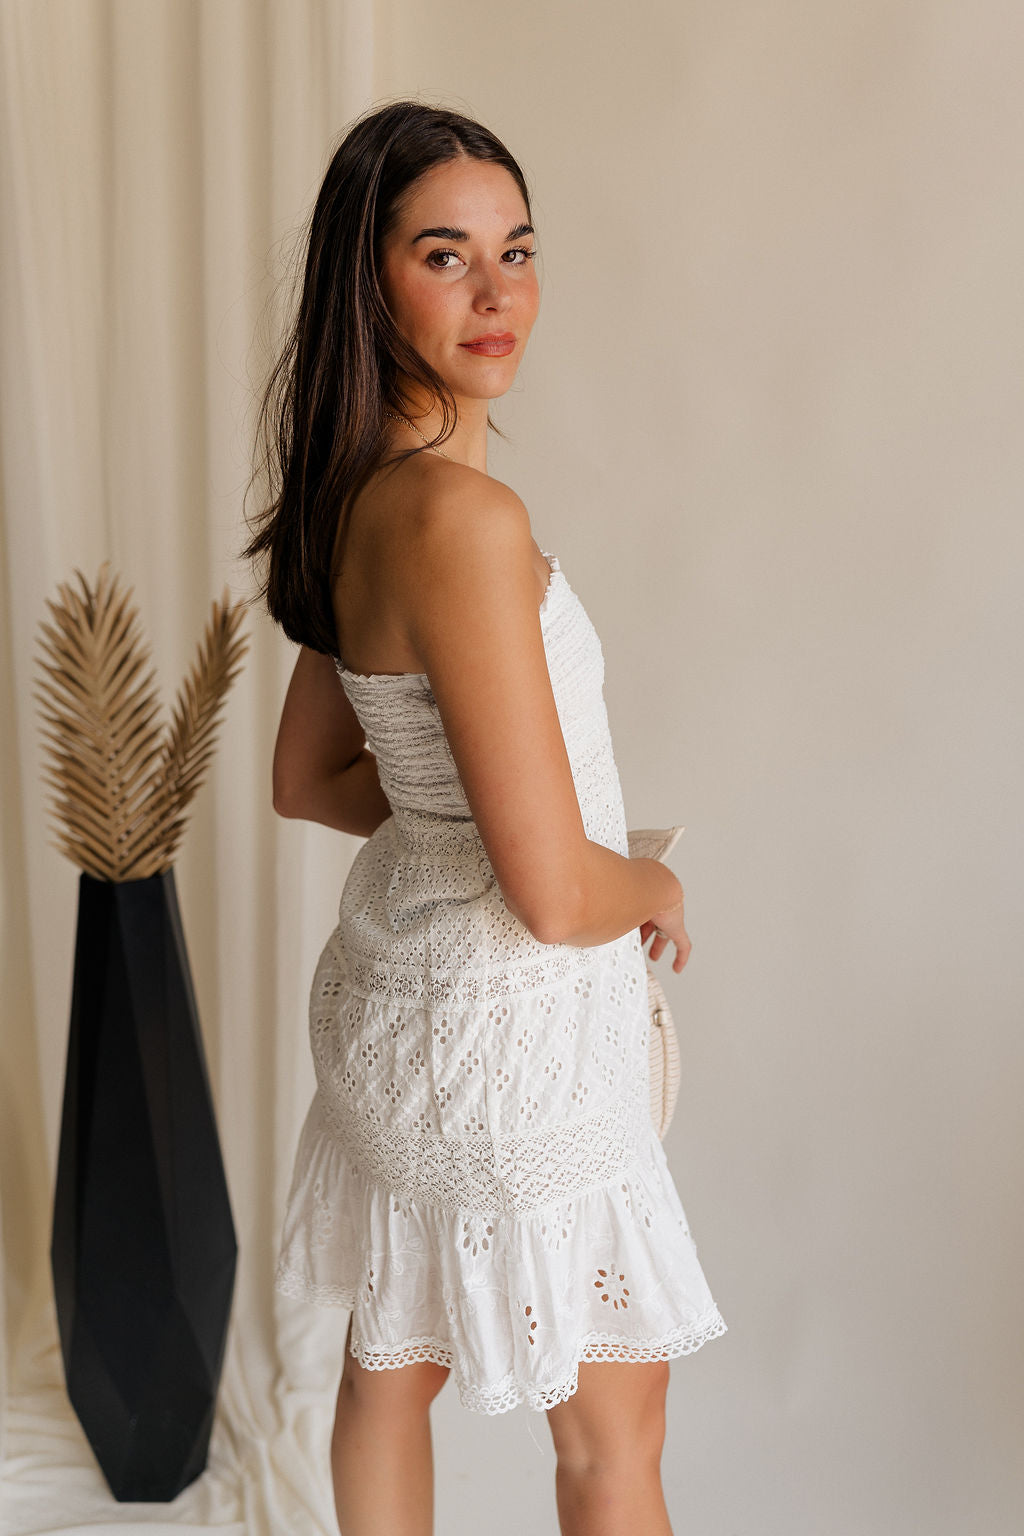 side view of female model wearing the Lucia White Eyelet Strapless Mini Dress which features White Eyelet Pattern, White Lining, Mini Length, Flare Hem Skirt and Strapless